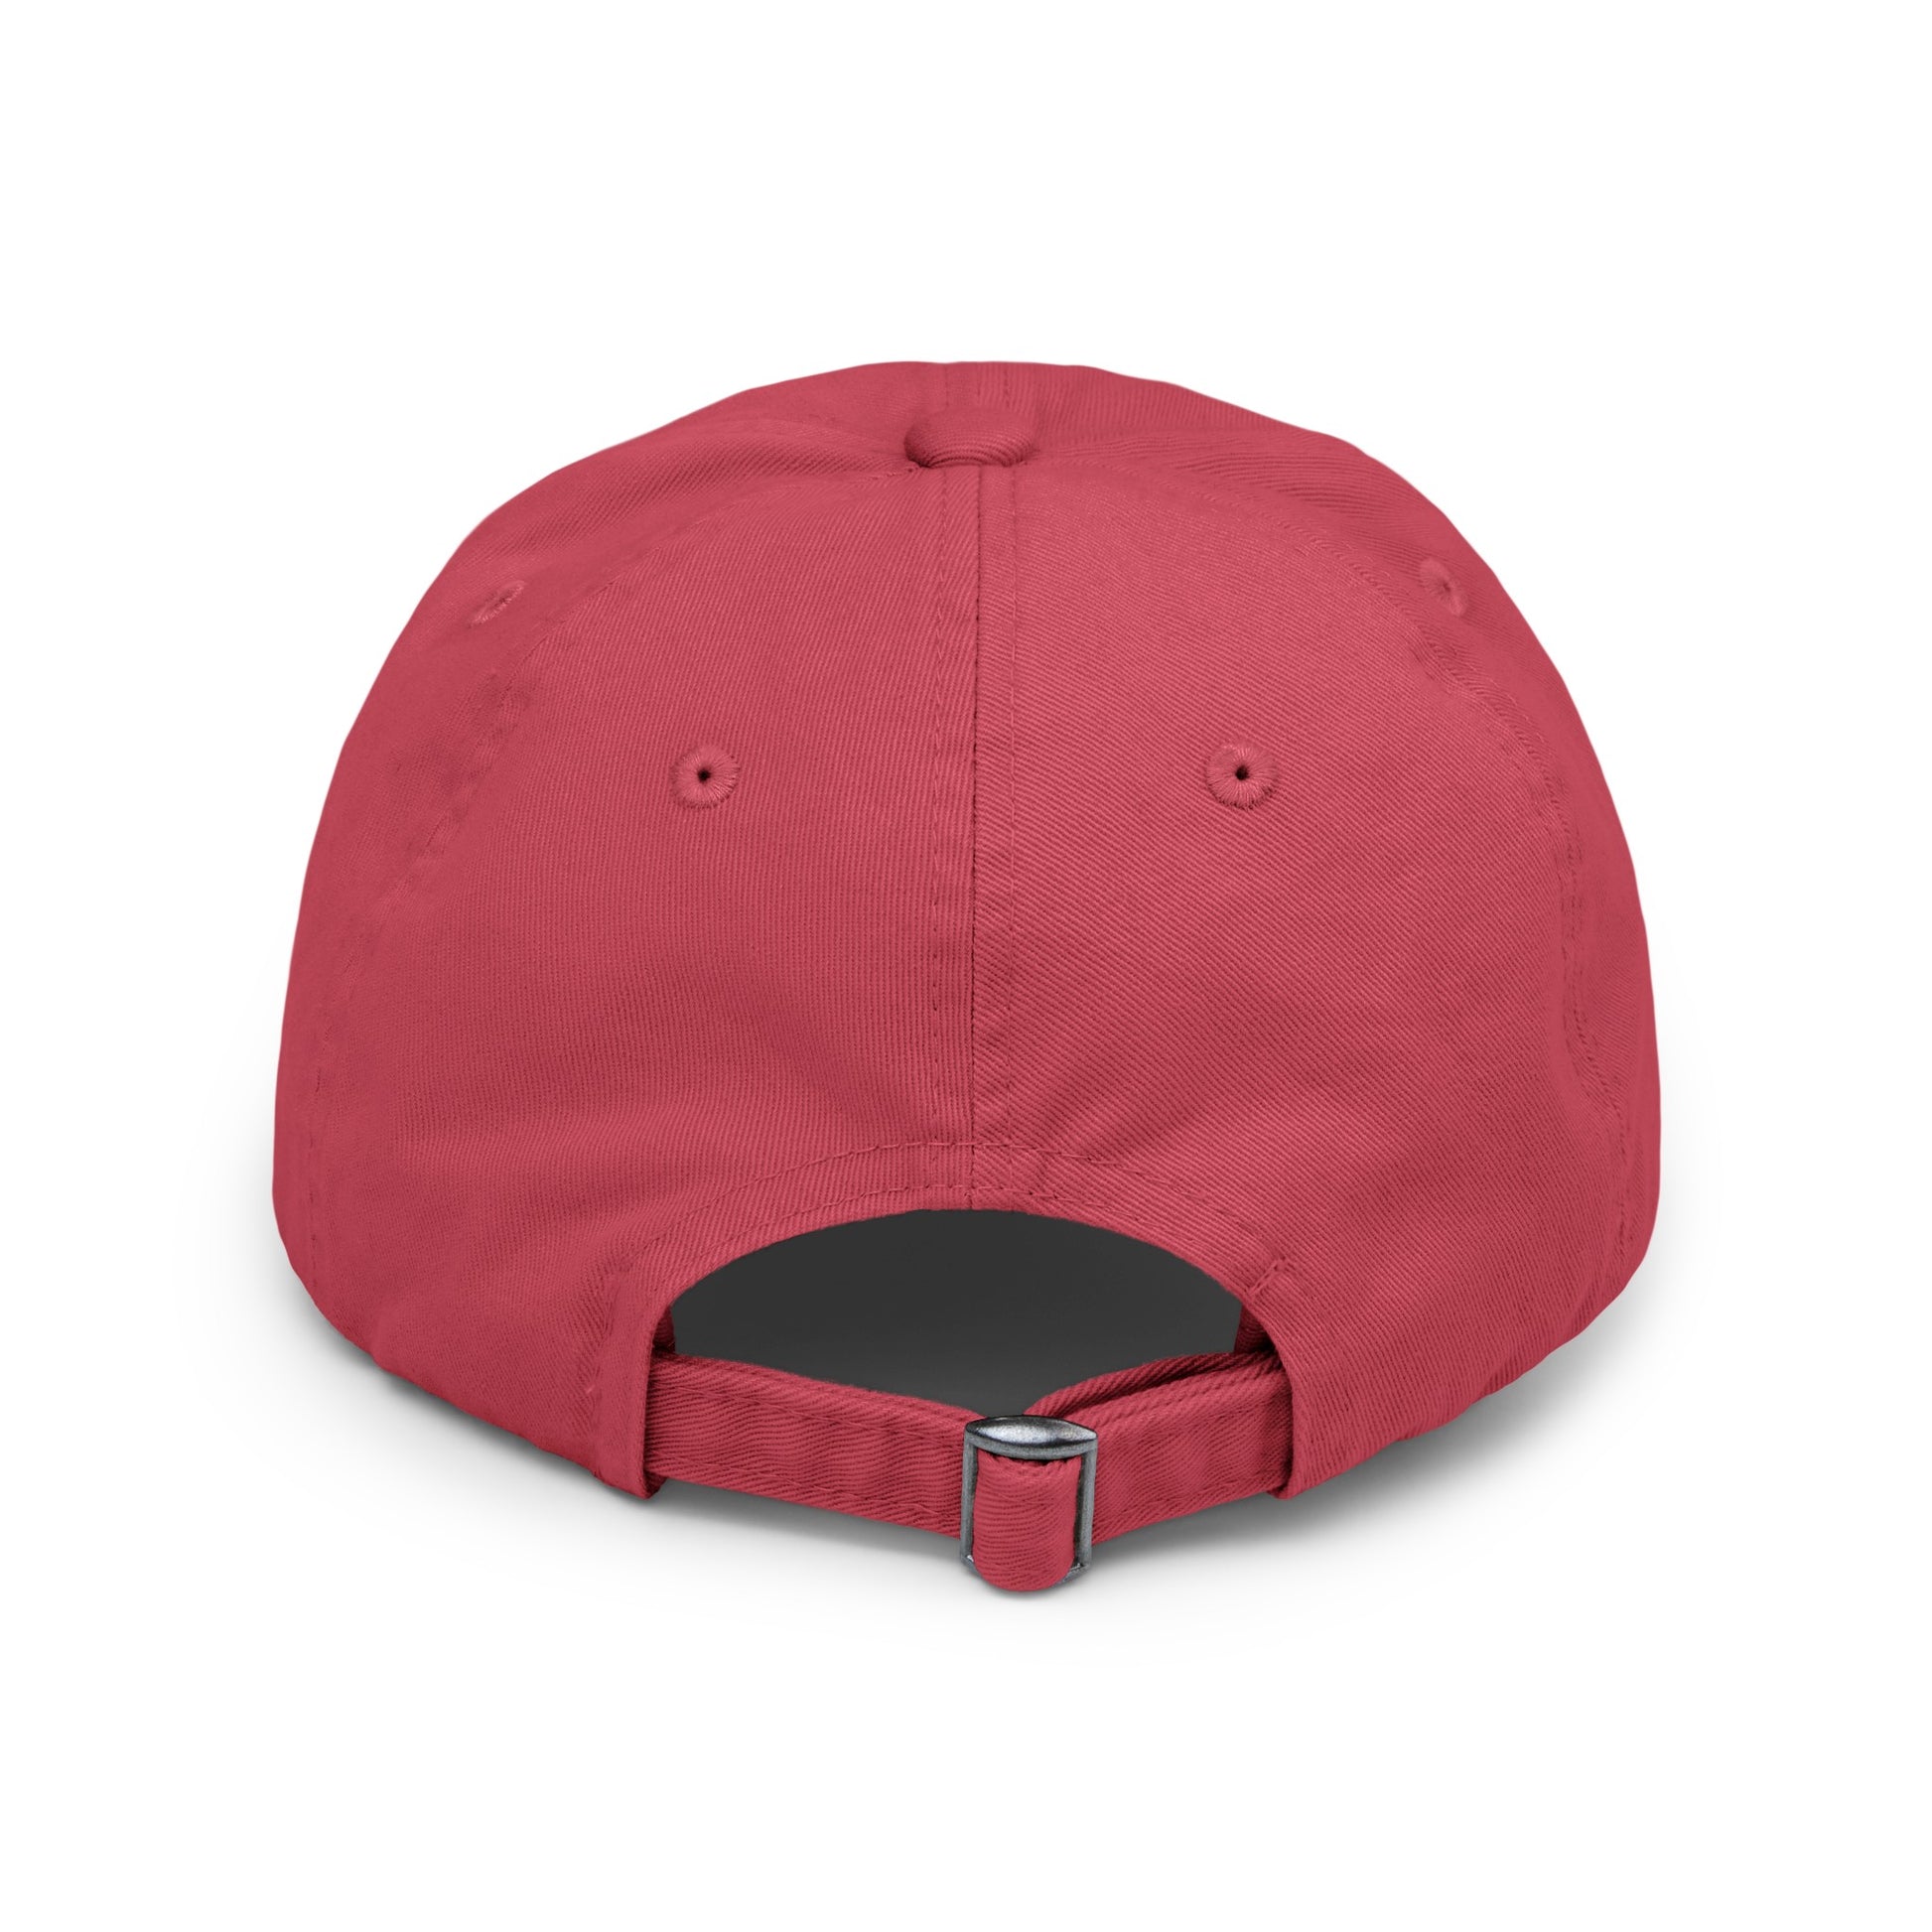 a red hat with a metal buckle on it